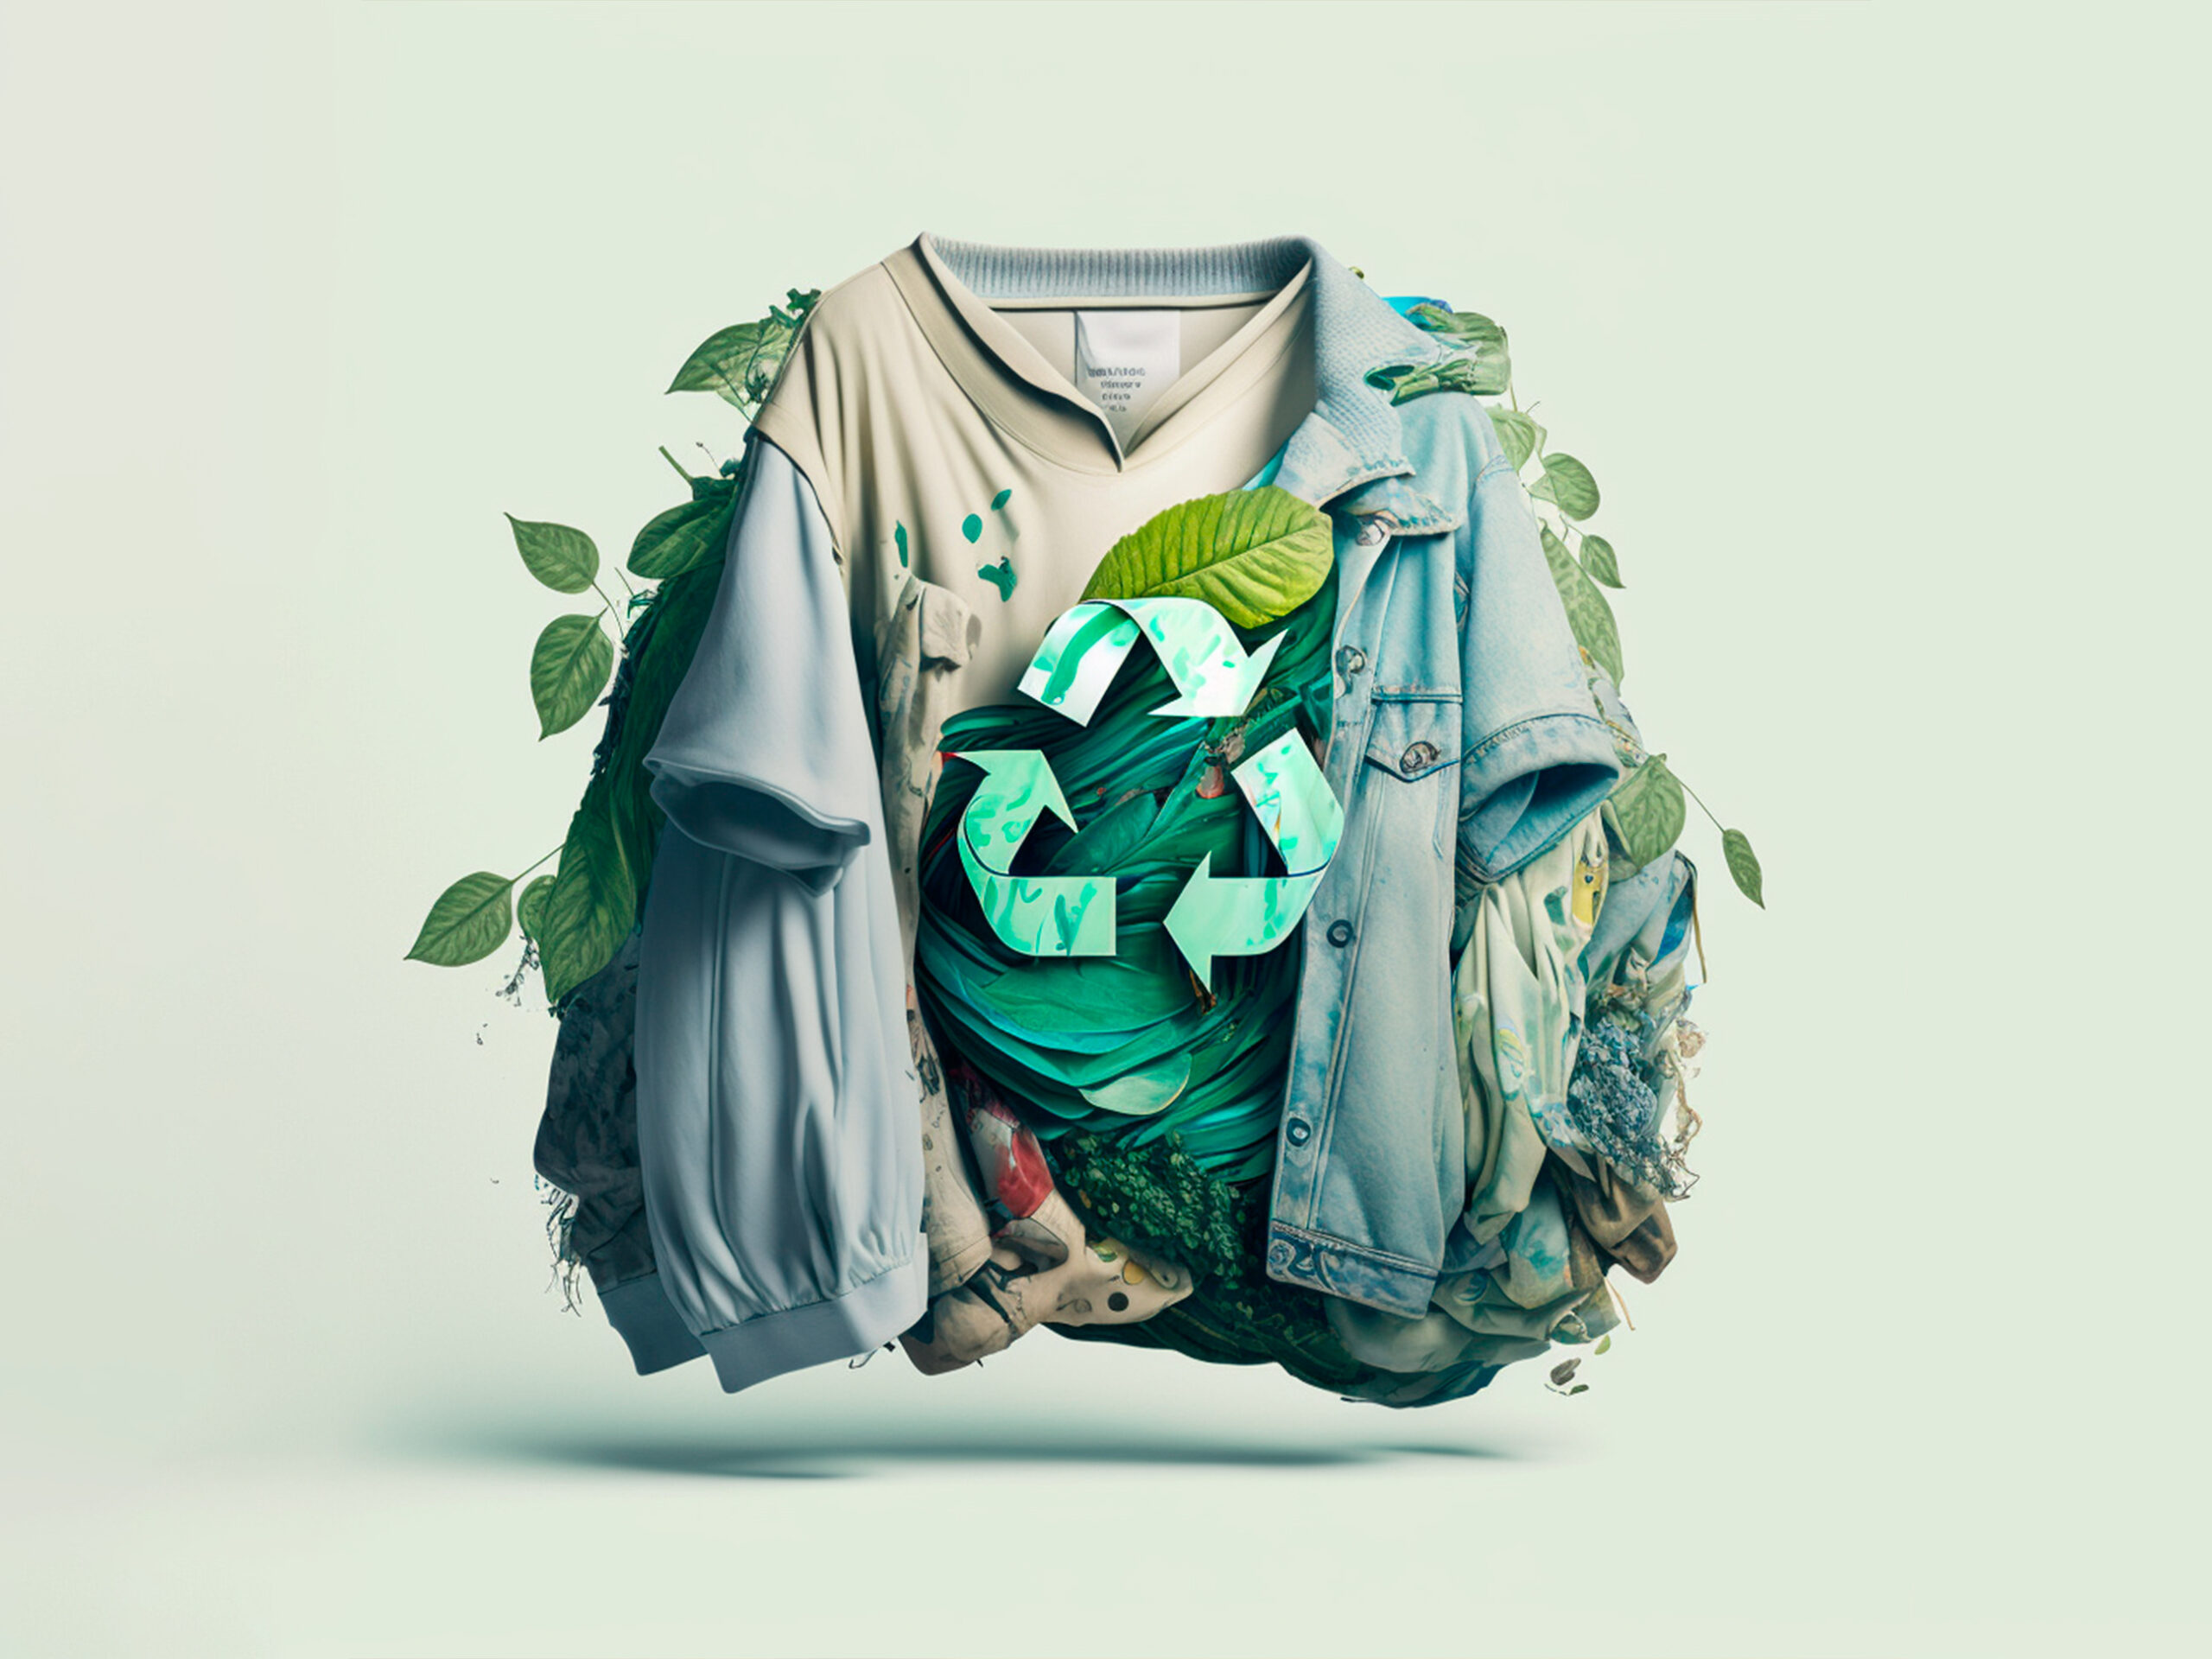 Clothing with recycling sign